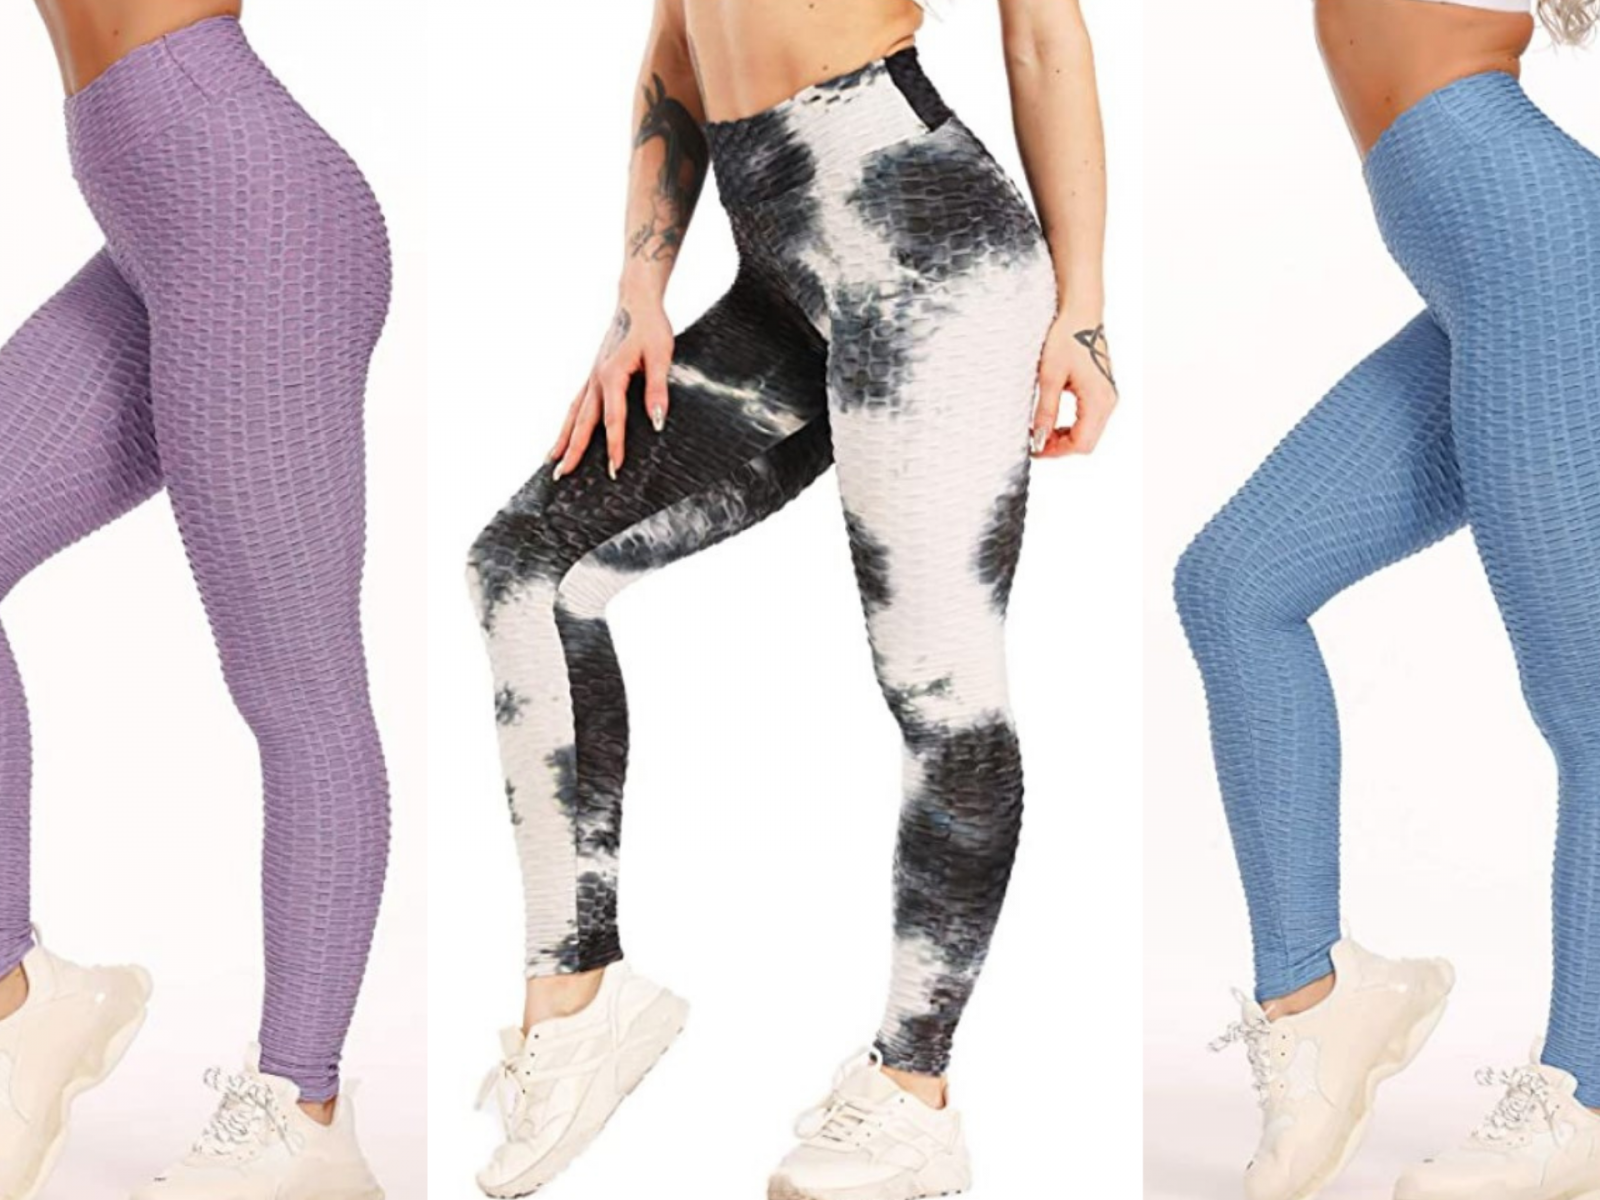 Are you tired of leg days at the gym? Give your booty an instant lift with  the SEASUM Women's High Waist Yoga Pants, or choose from a variety of  rear-enhancing leggings available